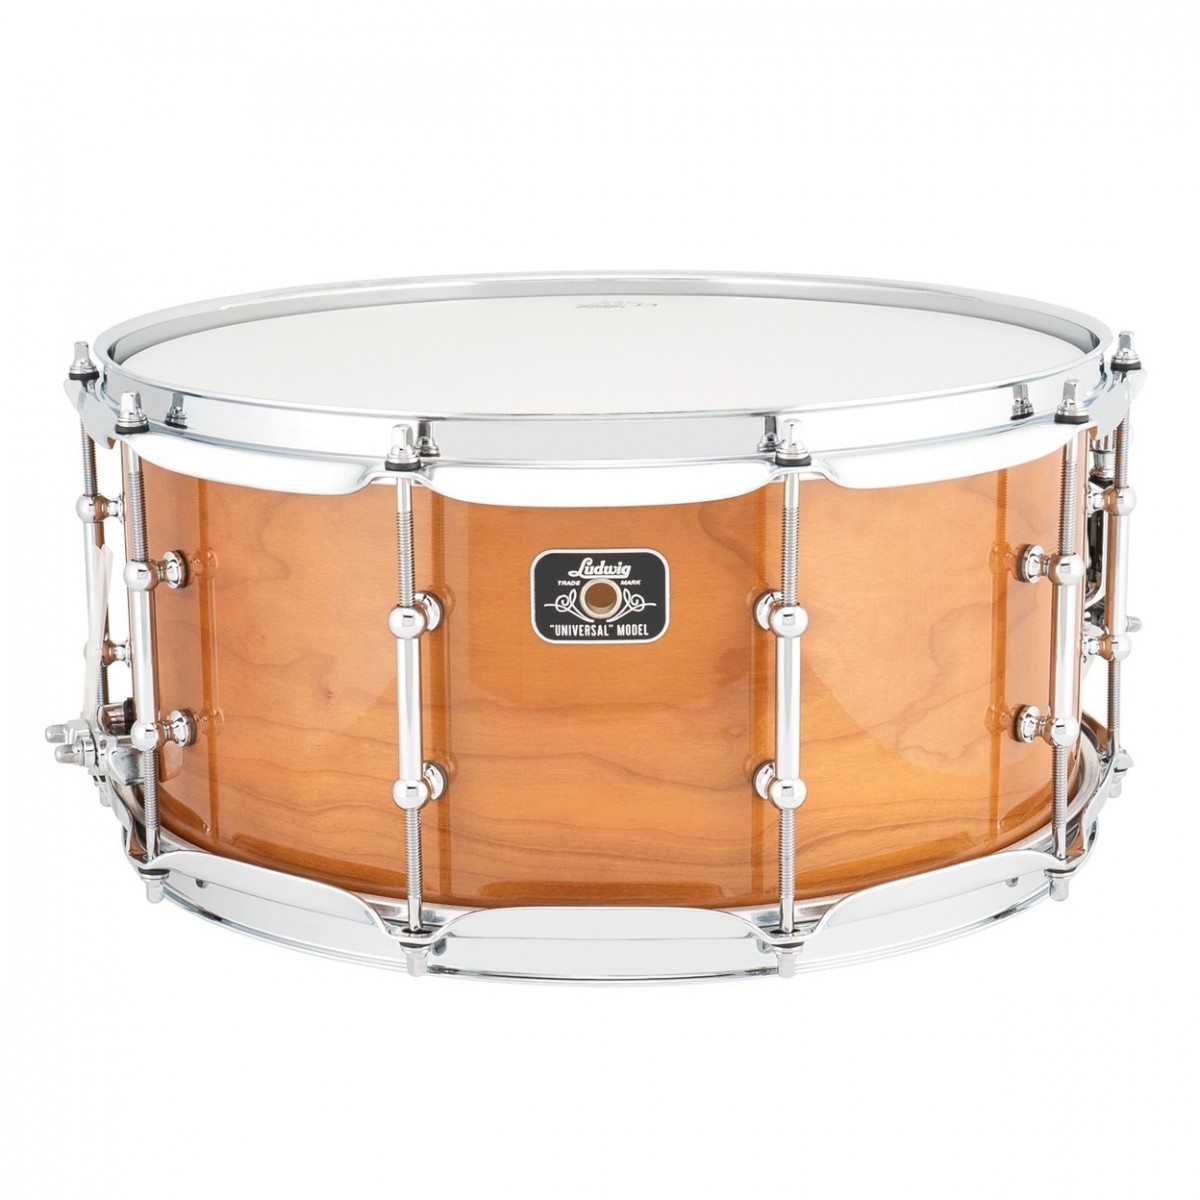 An image of Ludwig 14x6.5 Universal Series Cherry Snare Drum | PMT Online